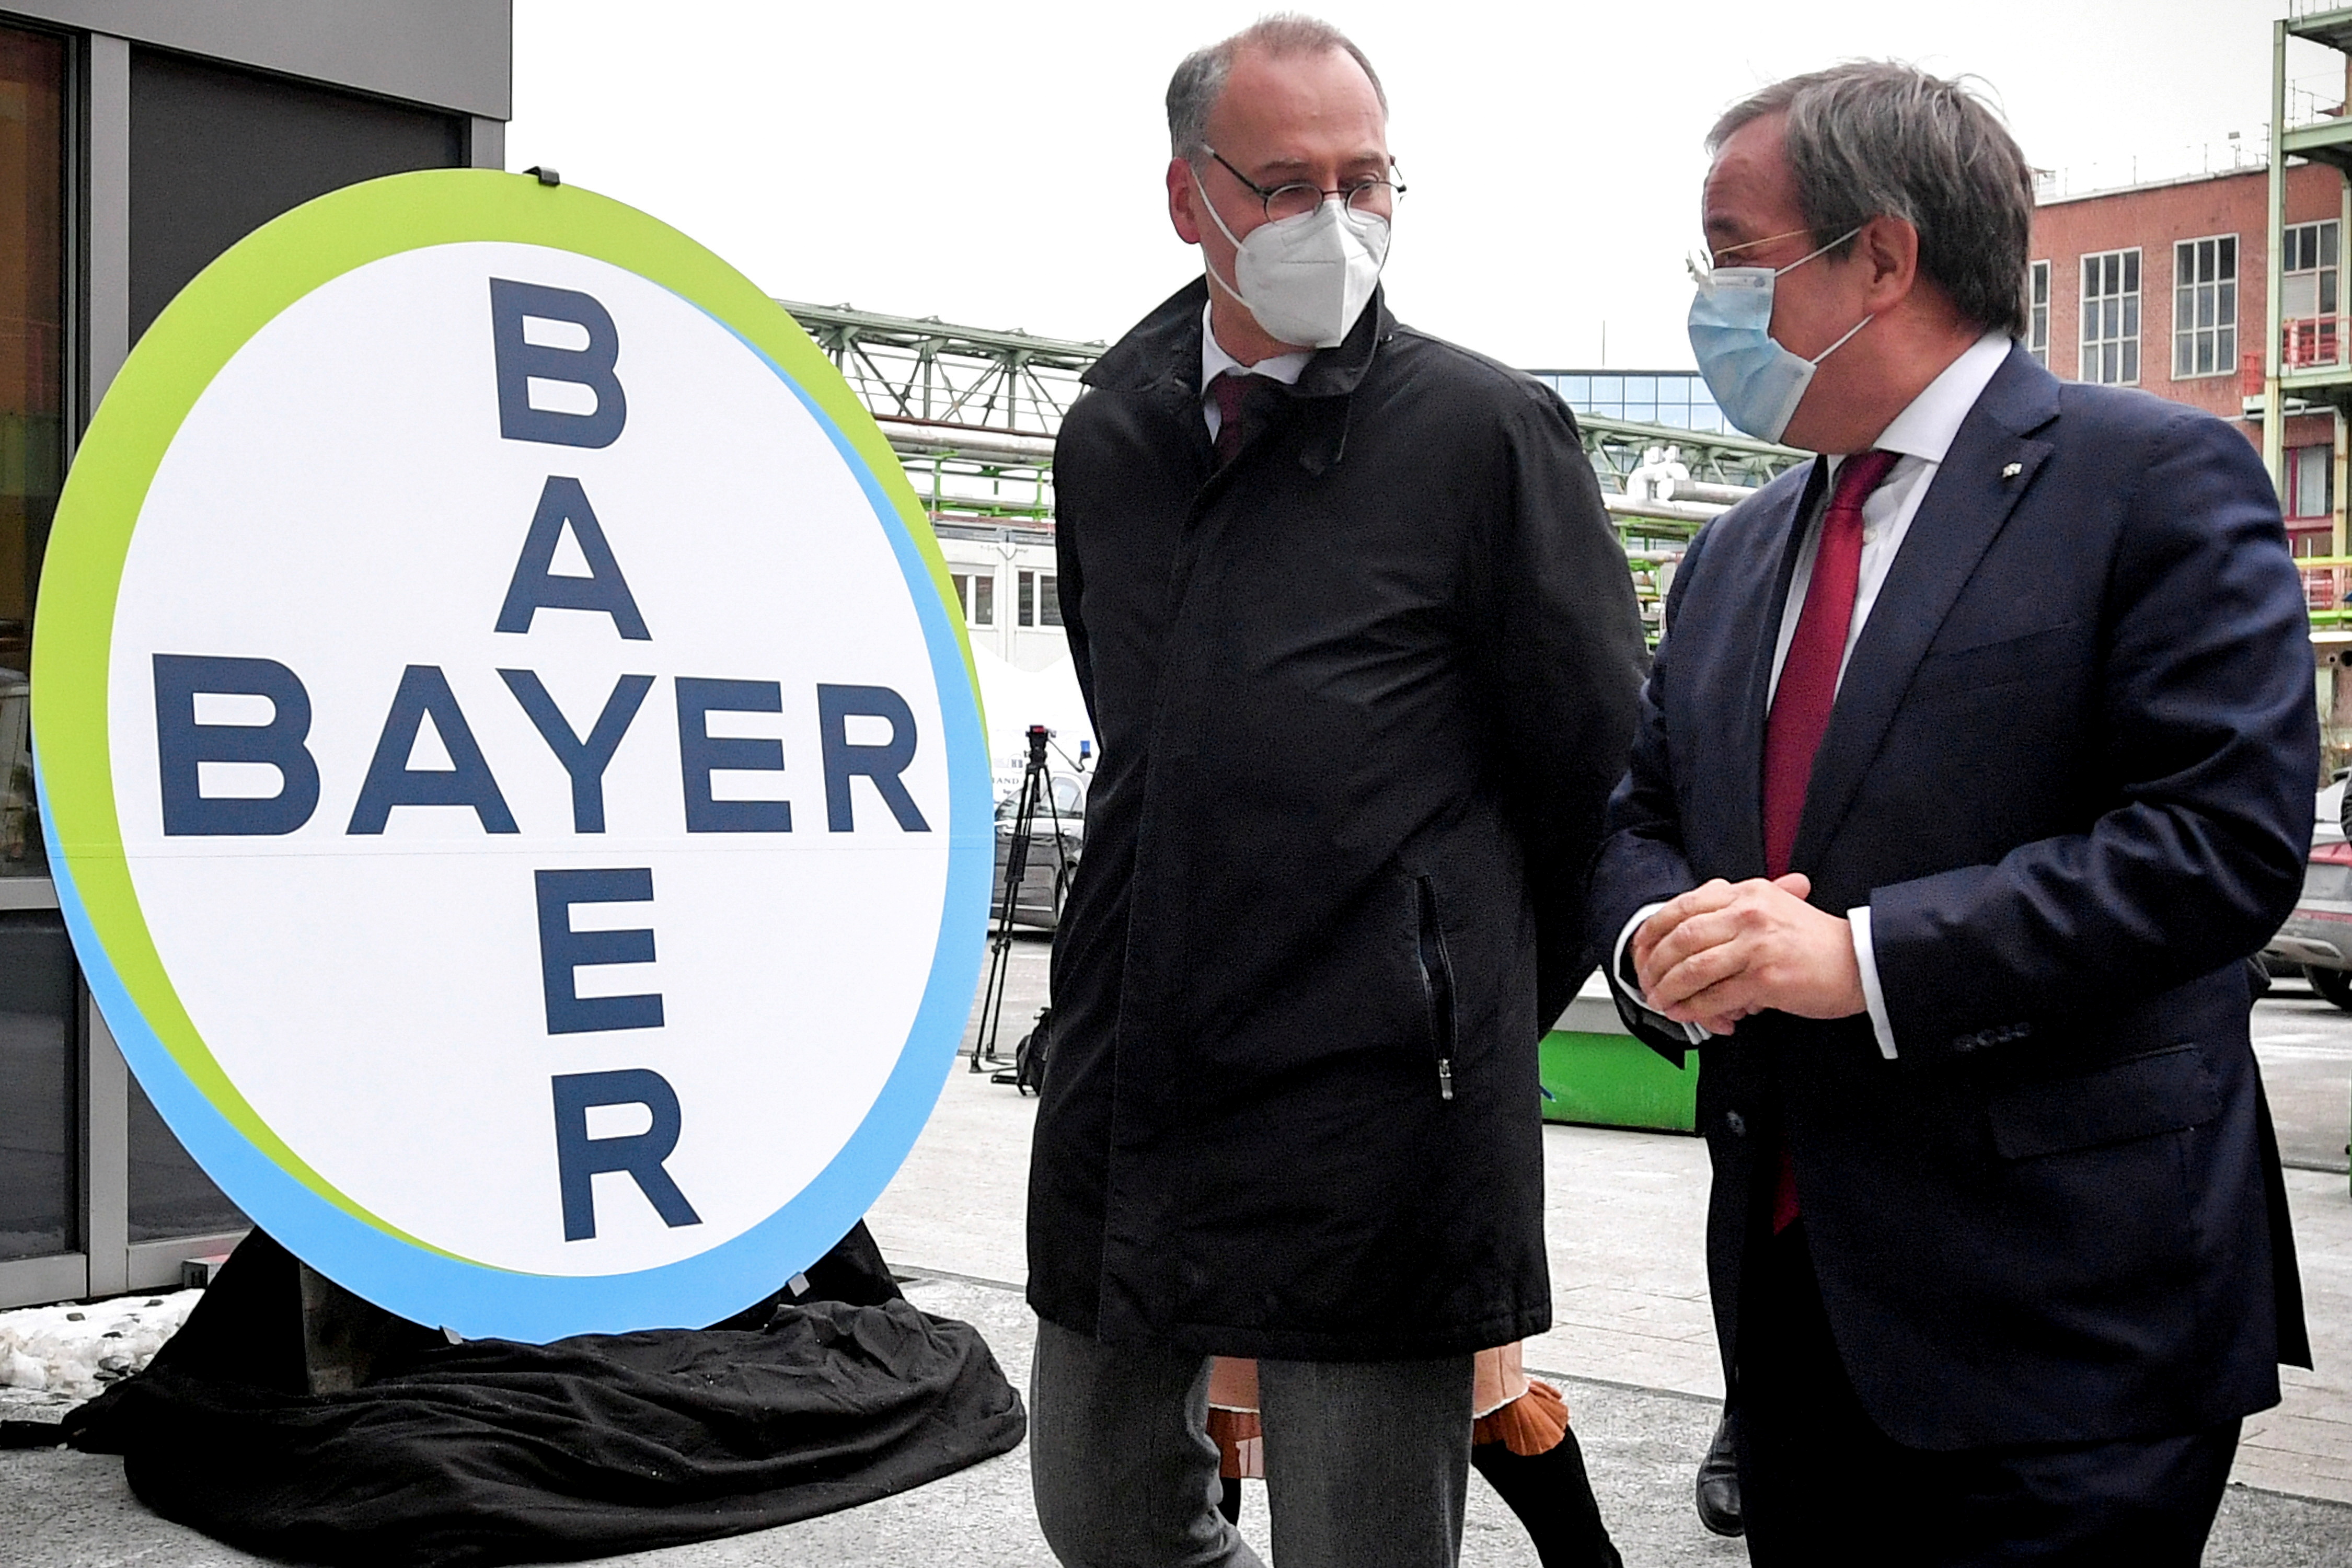 NRW PM Laschet and Bayer CEO Baumann visit future production site of CureVac's vaccine in Wuppertal